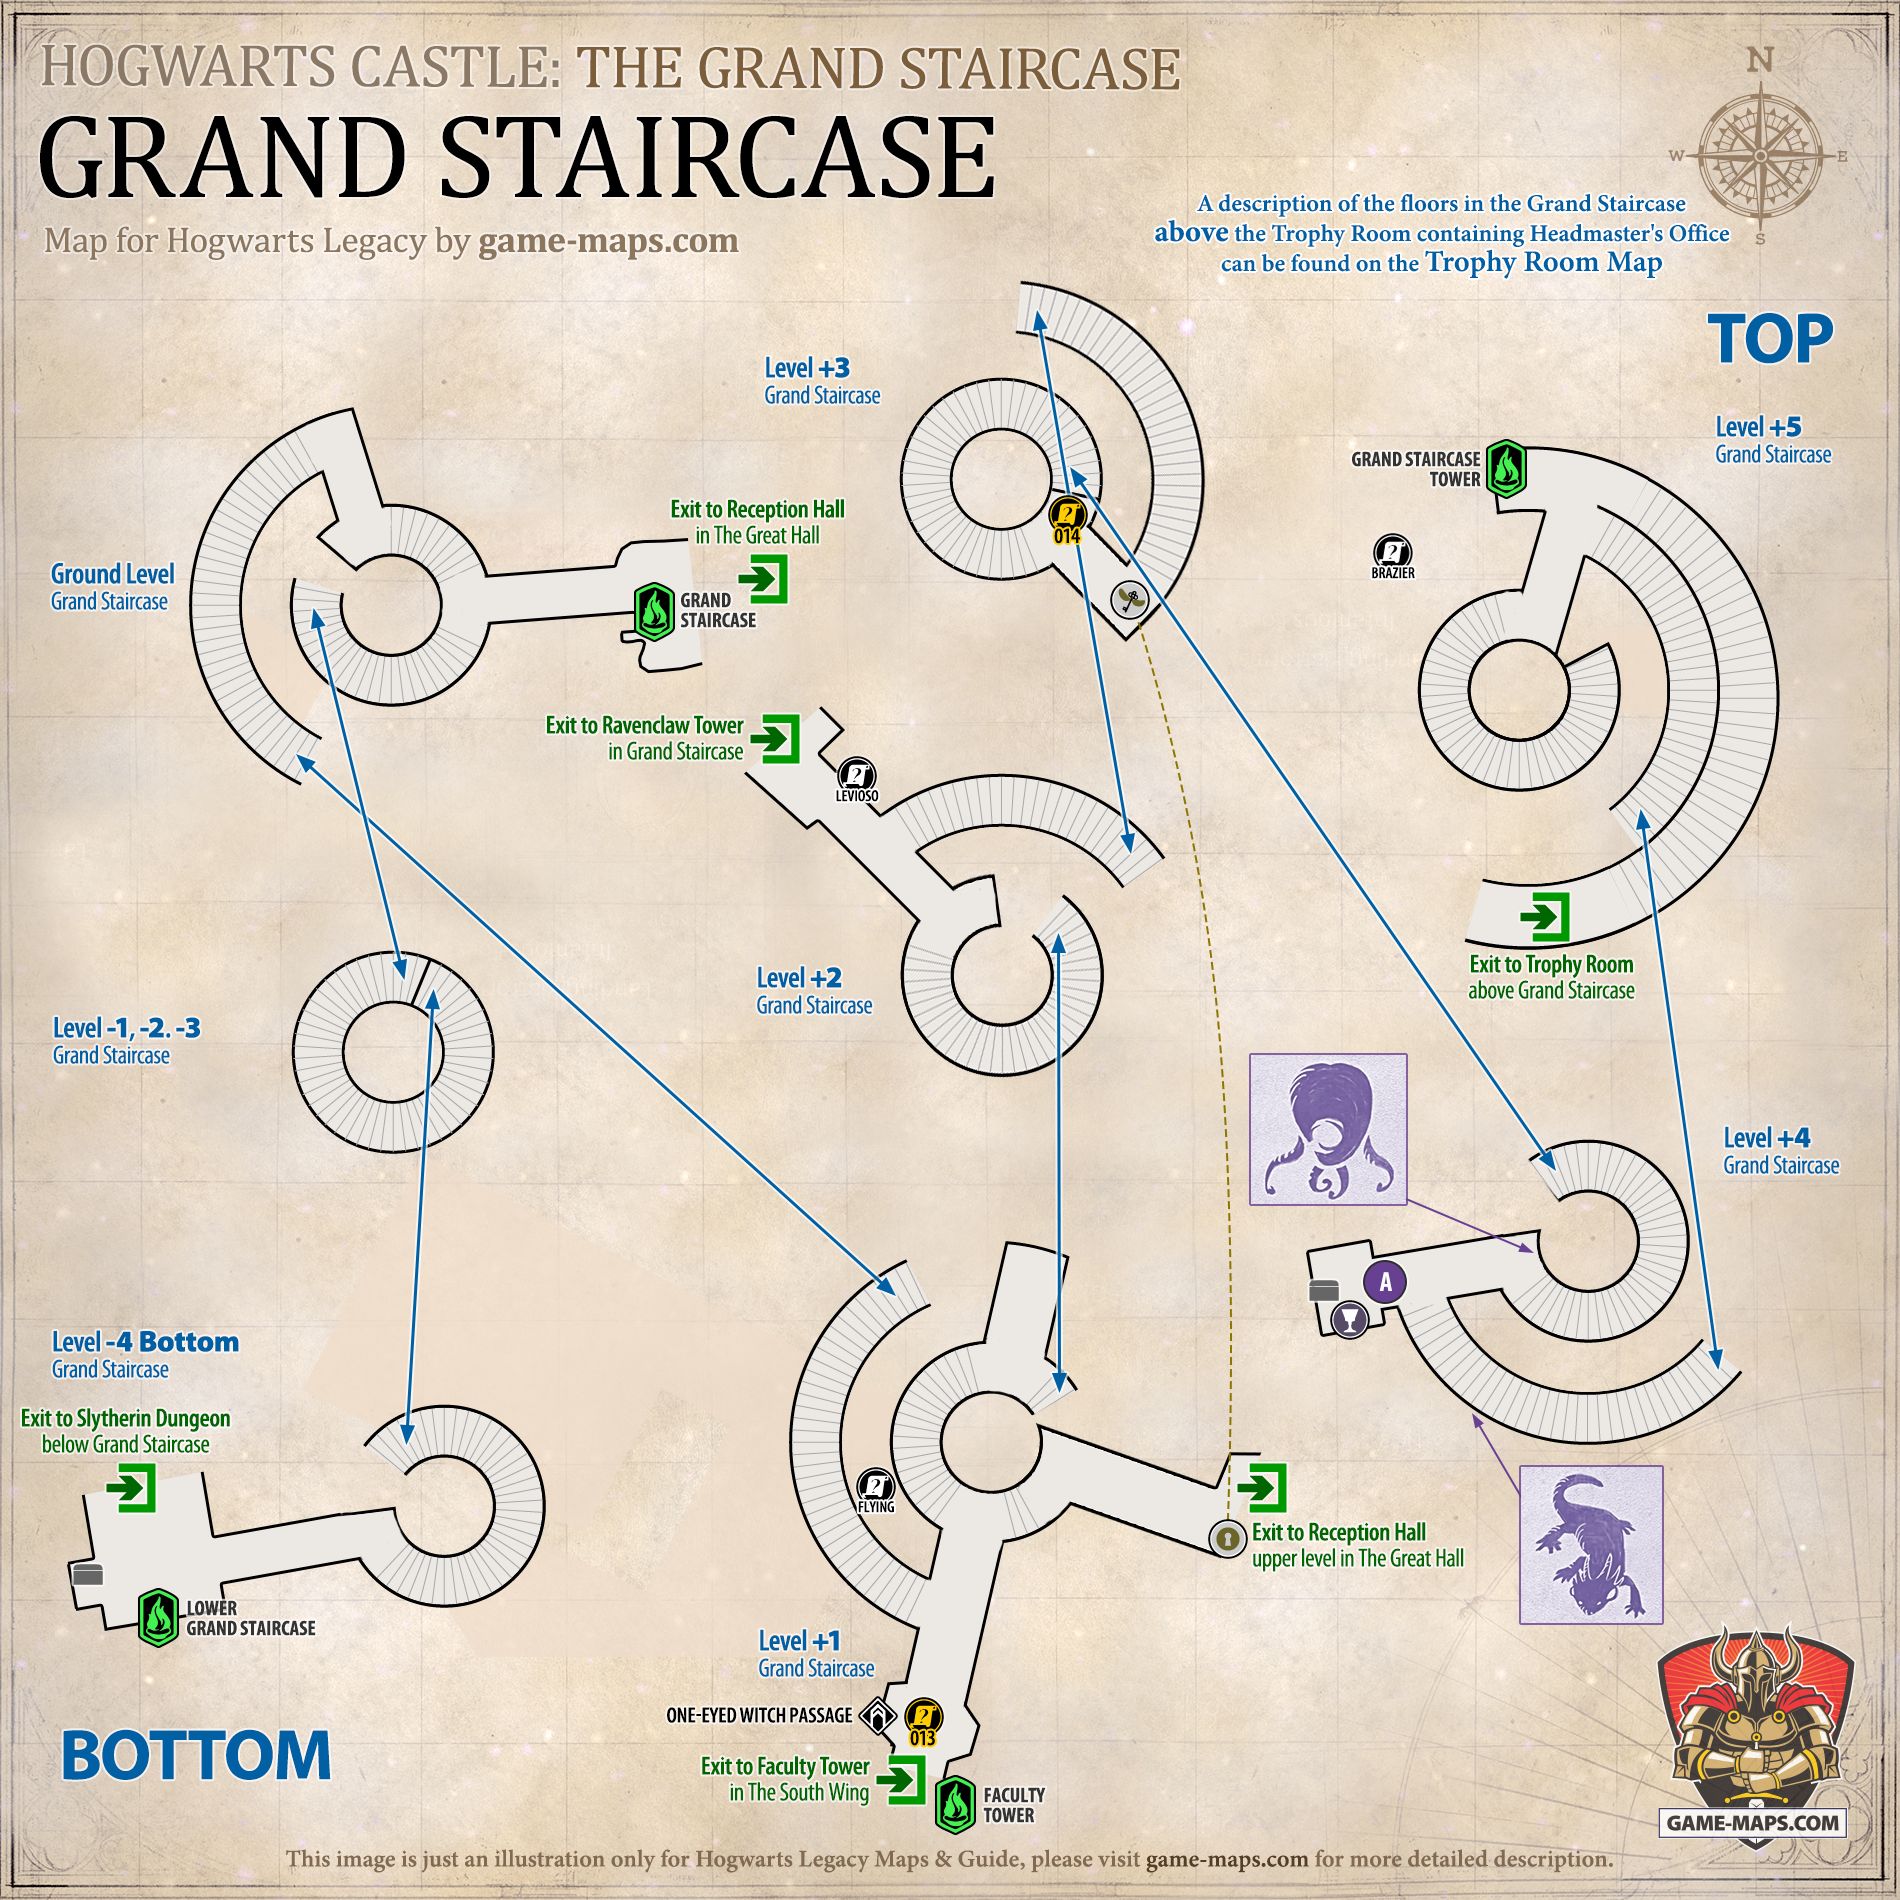 Grand Staircase Map for Hogwarts Legacy